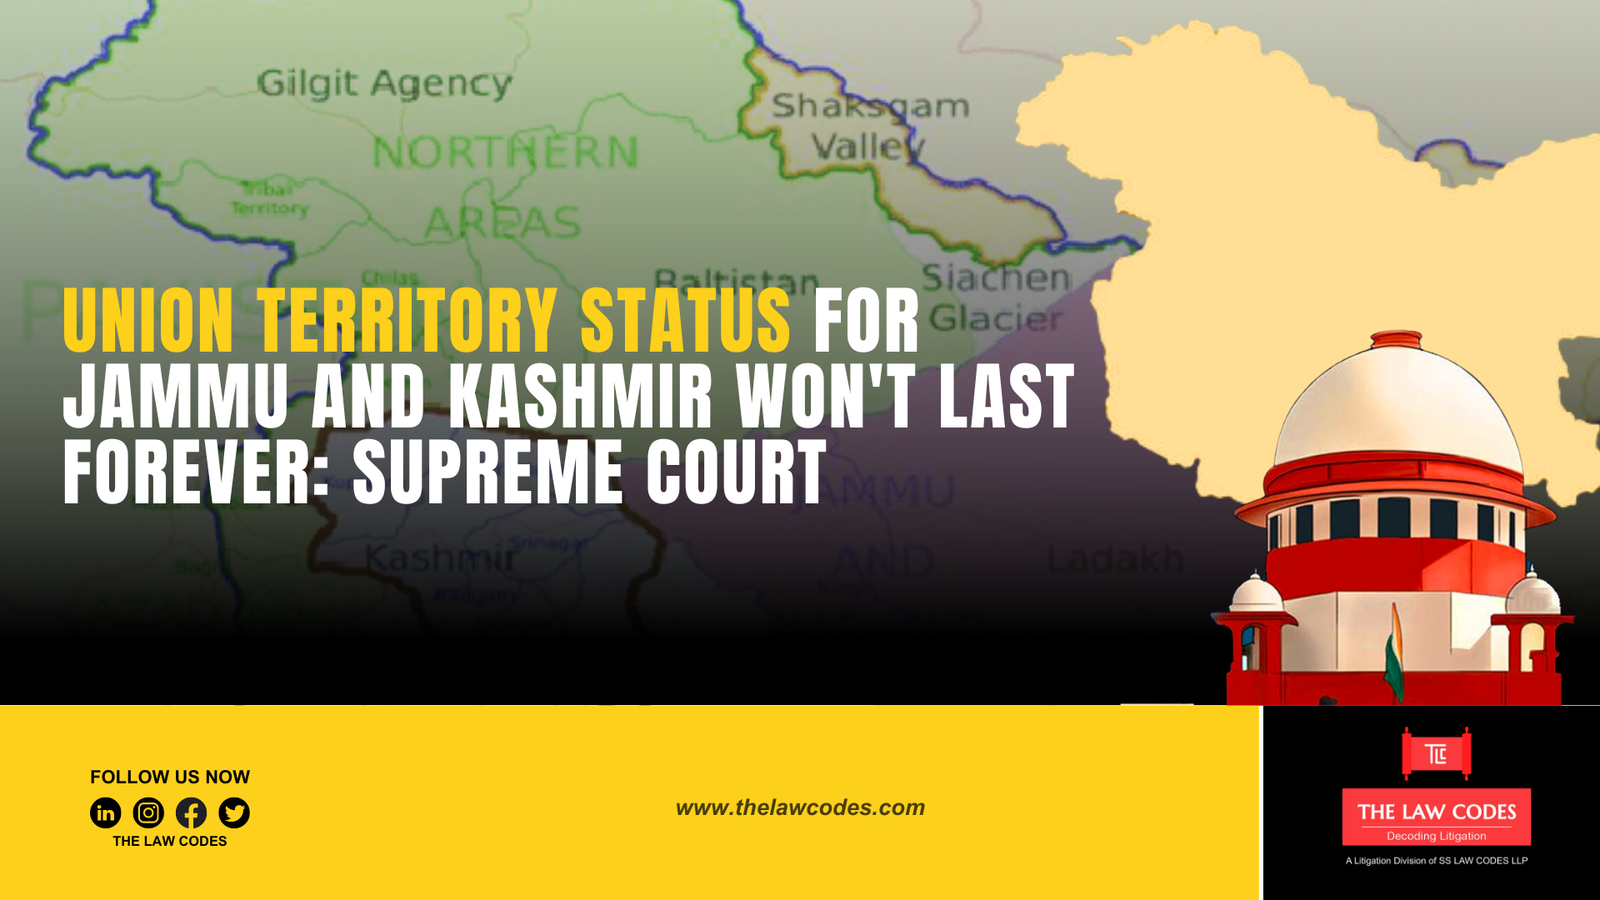 Union territory status for Jammu and Kashmir won't last forever SUPREME COURT